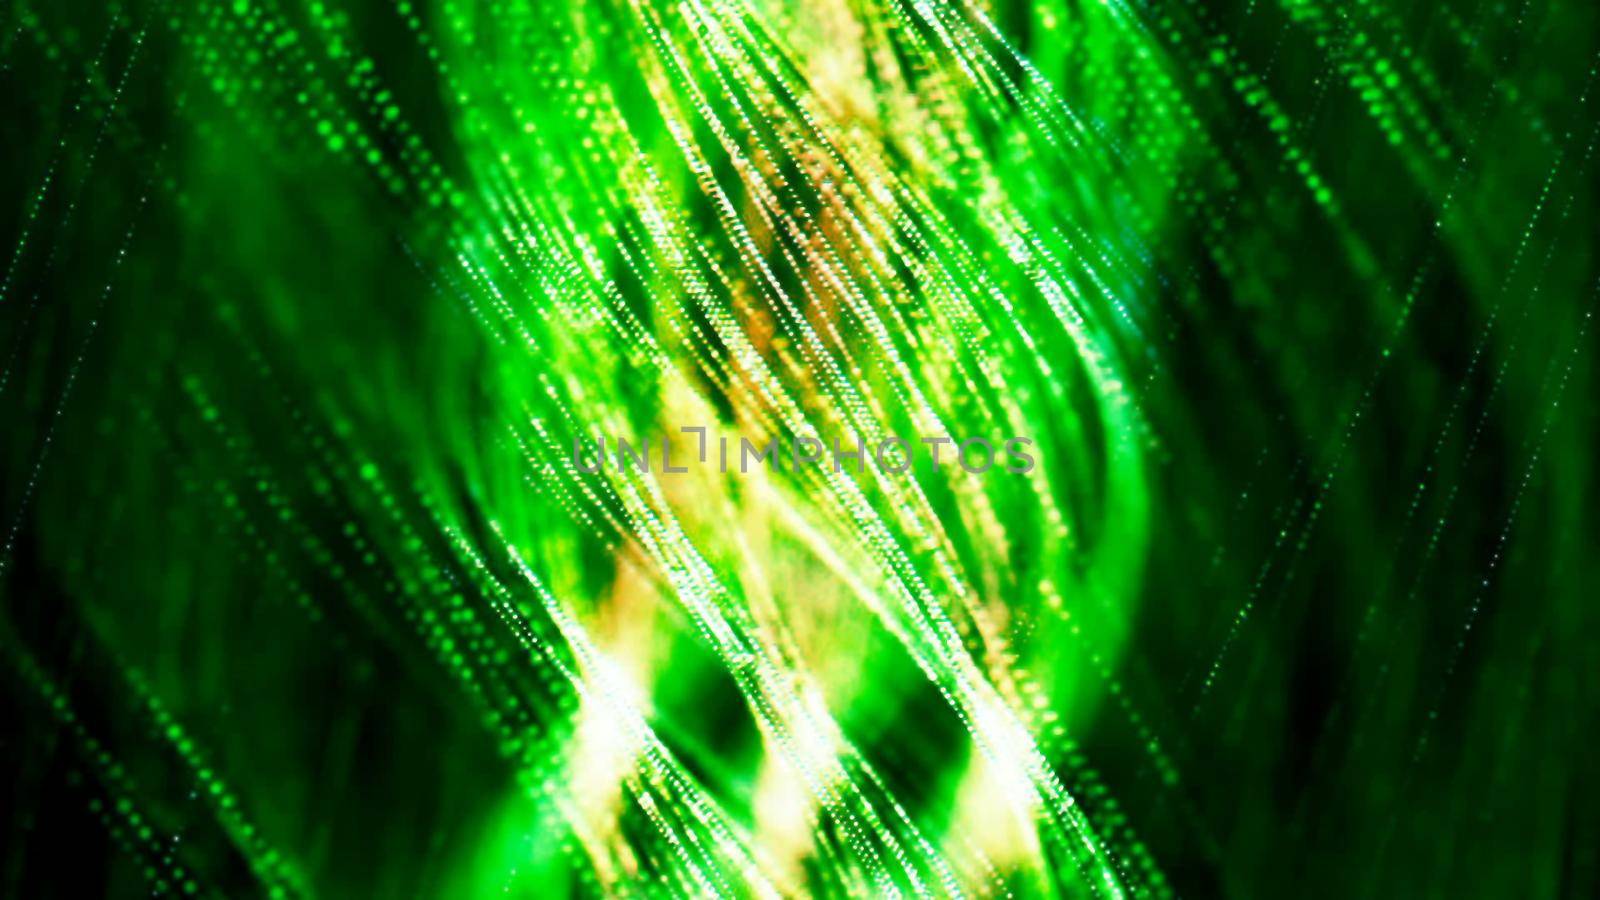 Abstract Background with nice abstract green spiral